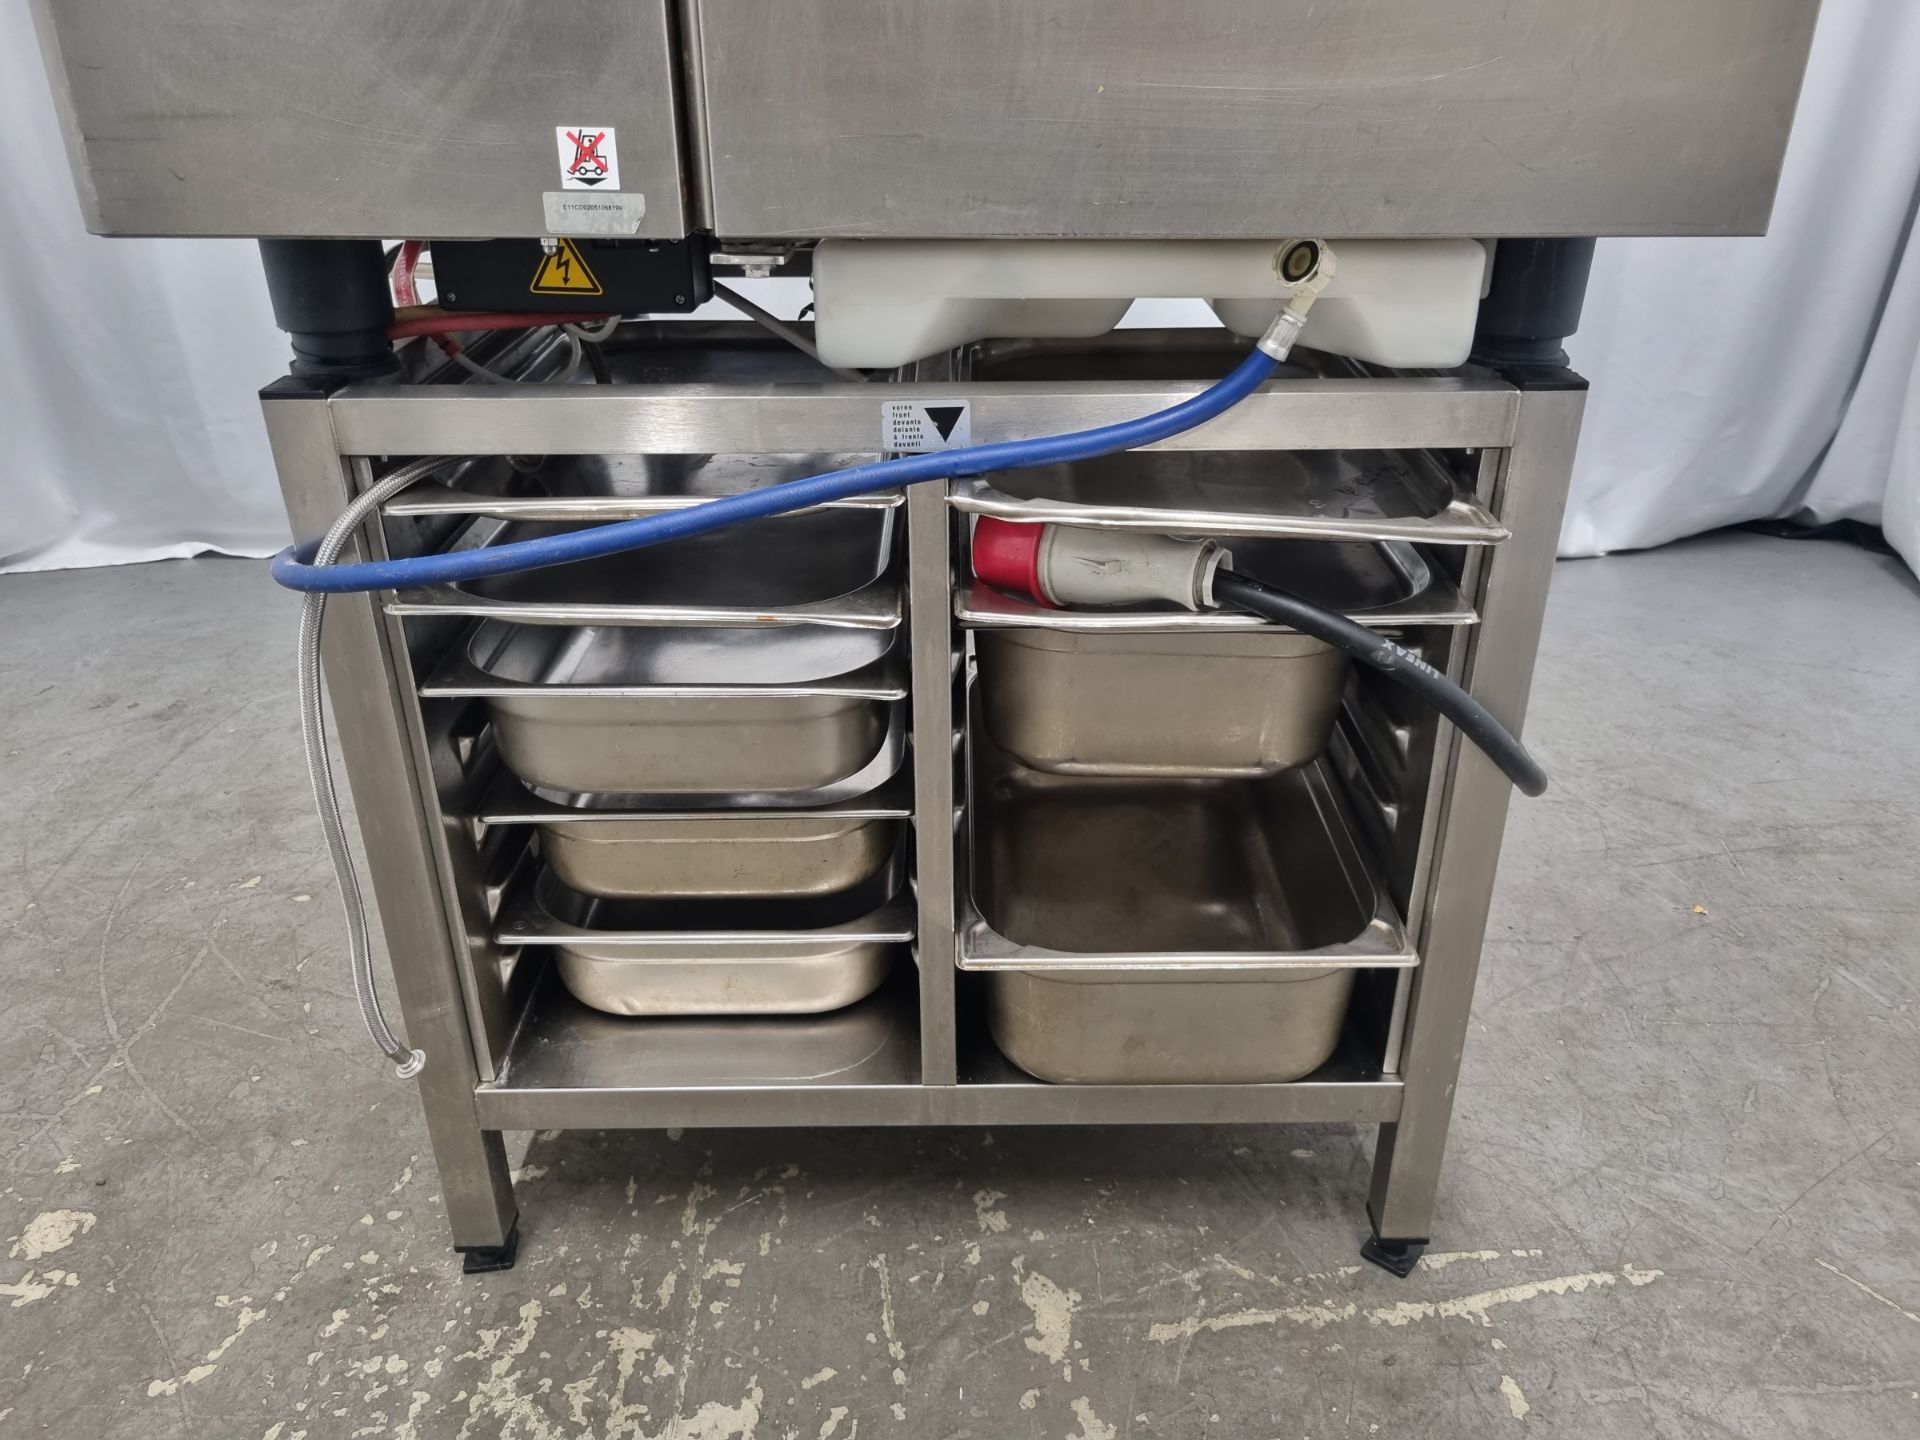 Rational cpc 101 climaPlus Combi oven with underneath racking and trays - Image 6 of 7